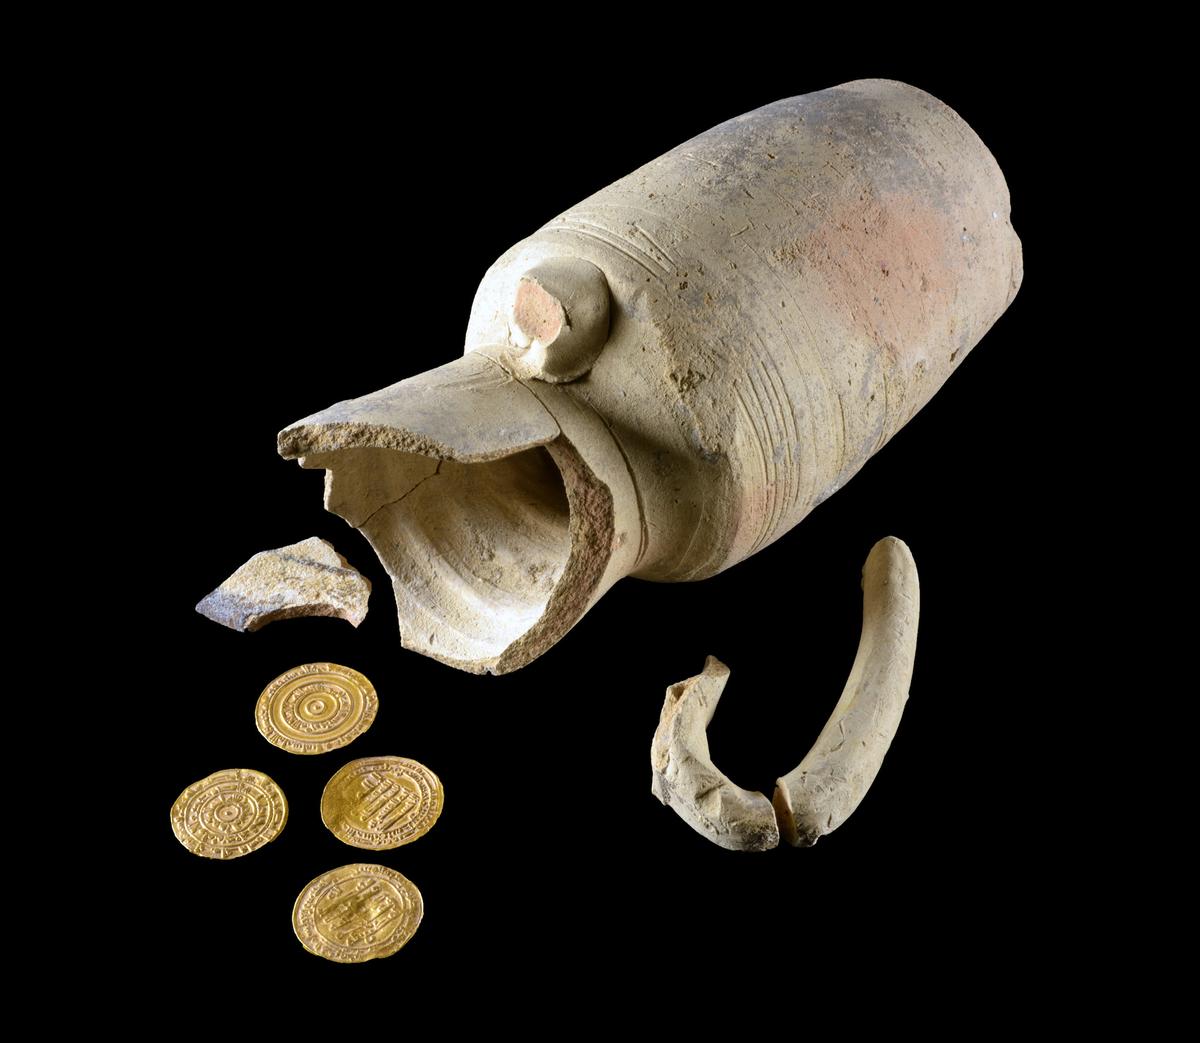 The juglet and the gold coins. (Photo: Dafna Gazit, <a href="http://www.antiquities.org.il/">Israel Antiquities Authority</a>)